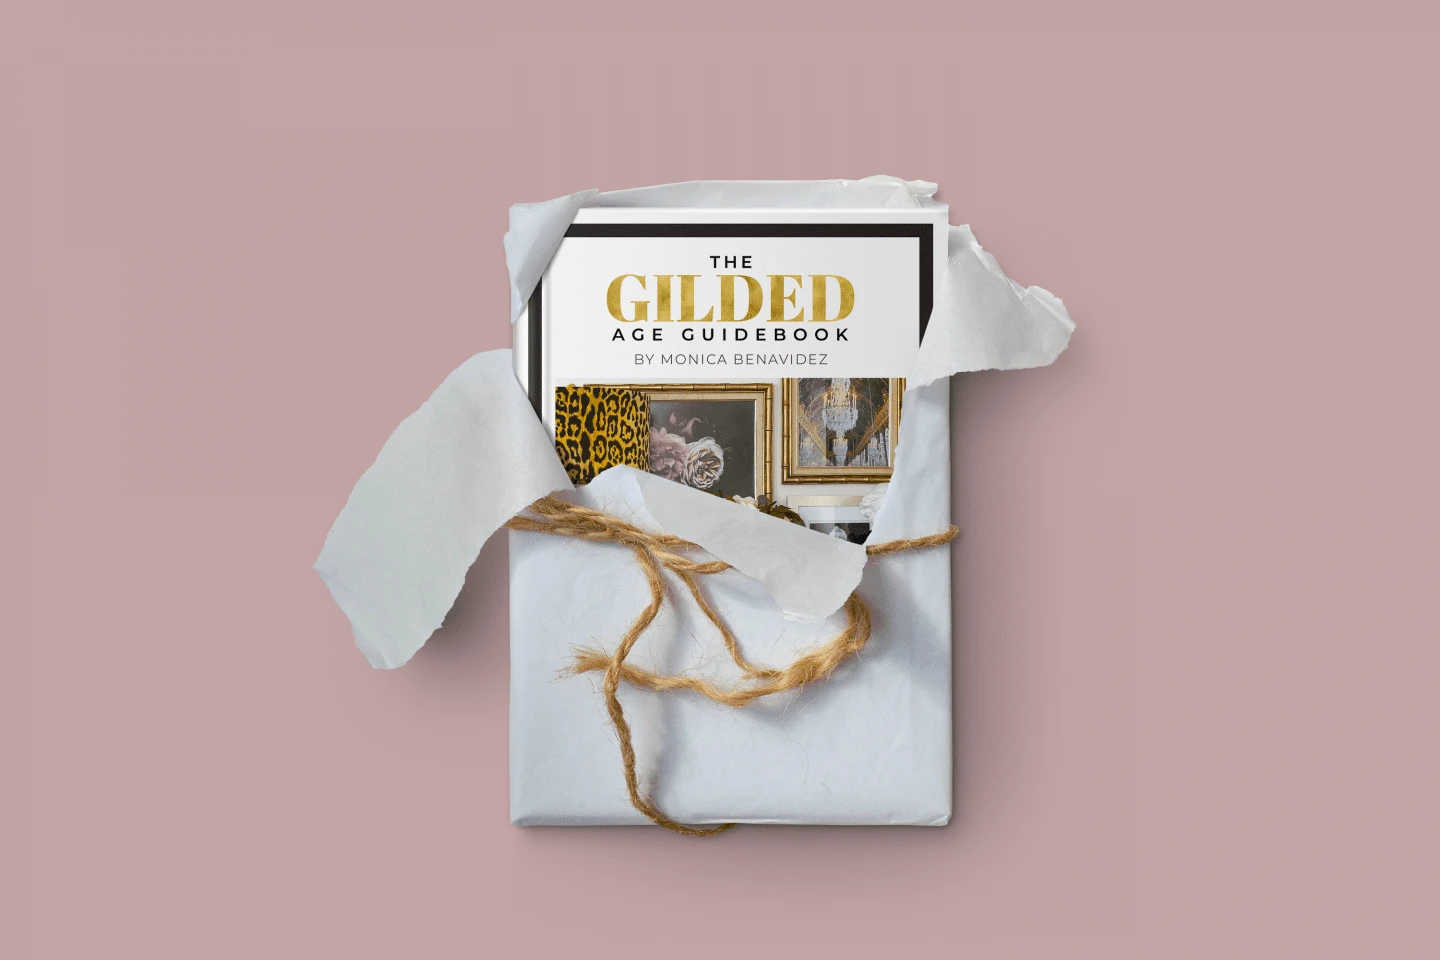 The Gilded Age Guidebook- guide to best metallic gold paints for DIY projects